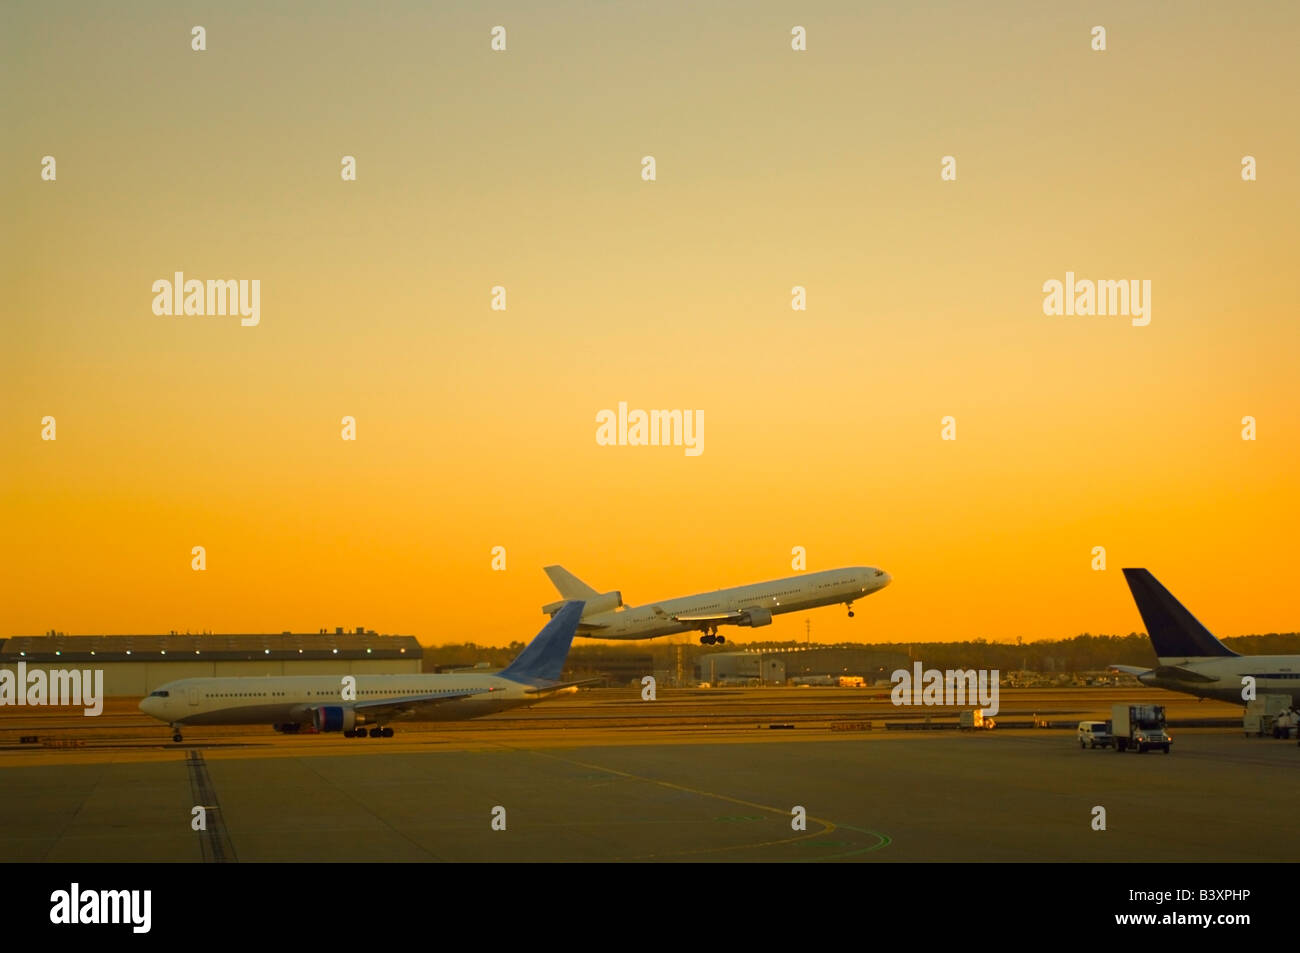 A commercial airplane taking off Stock Photo